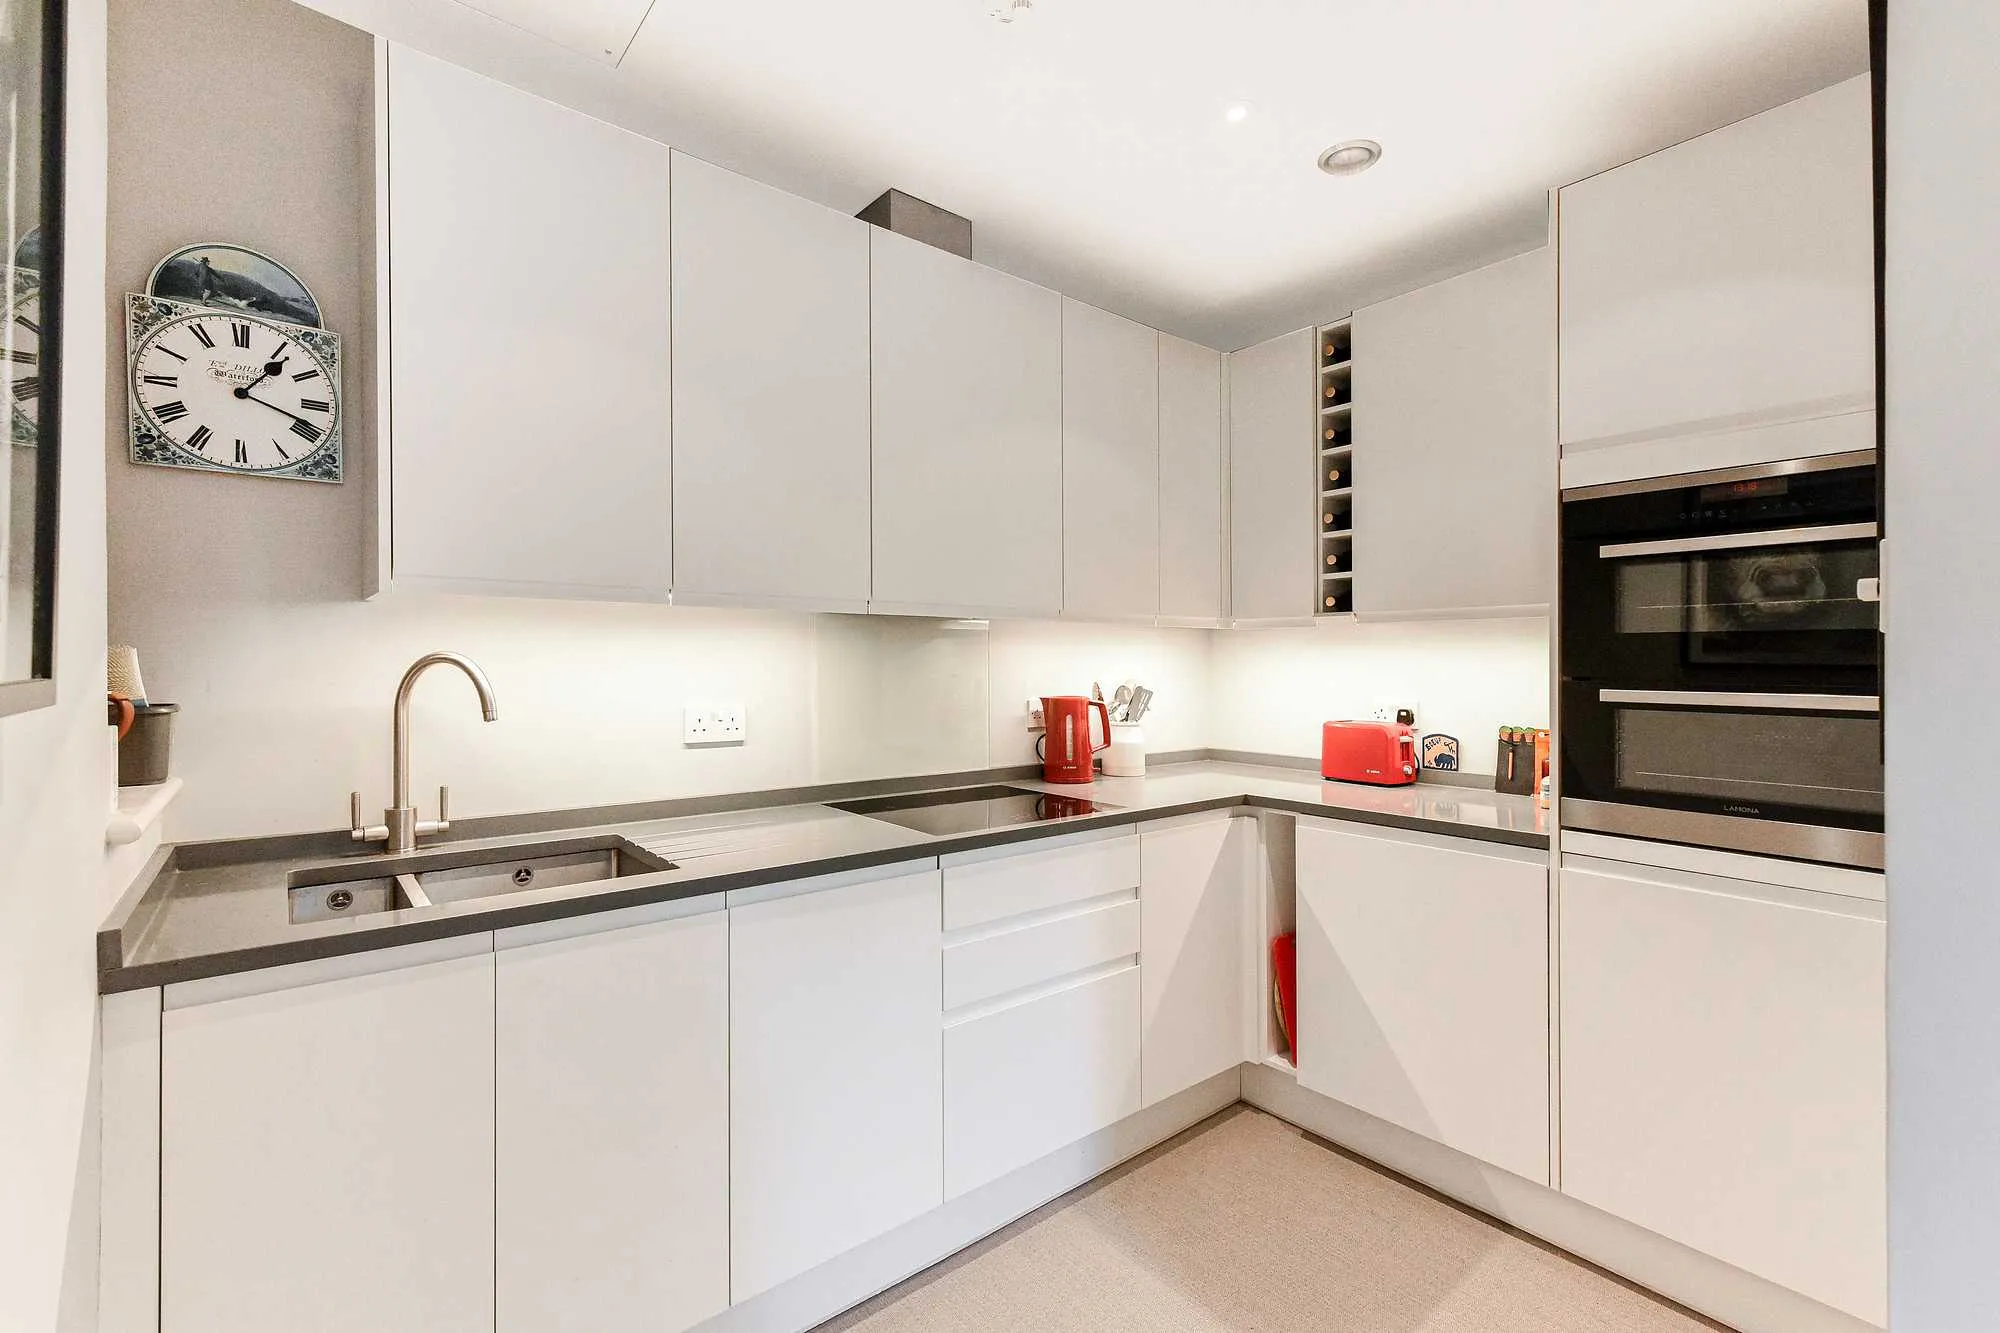 Embankment Gardens, holiday apartment in Chelsea, London